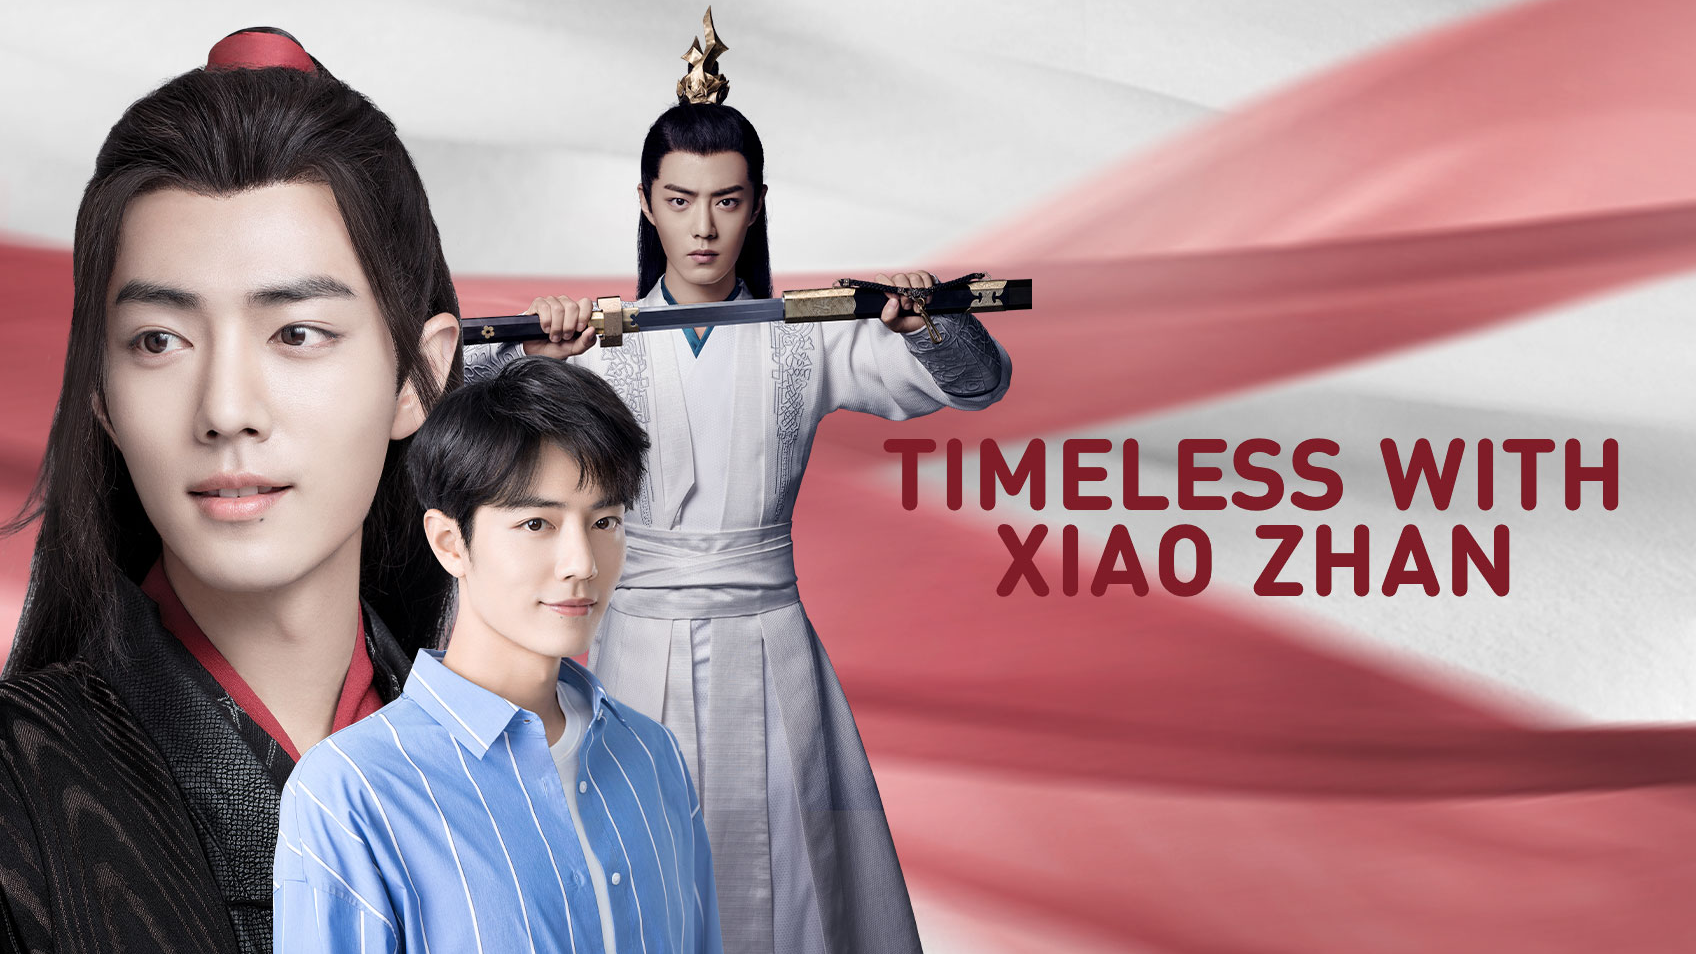 Timeless with Xiao Zhan